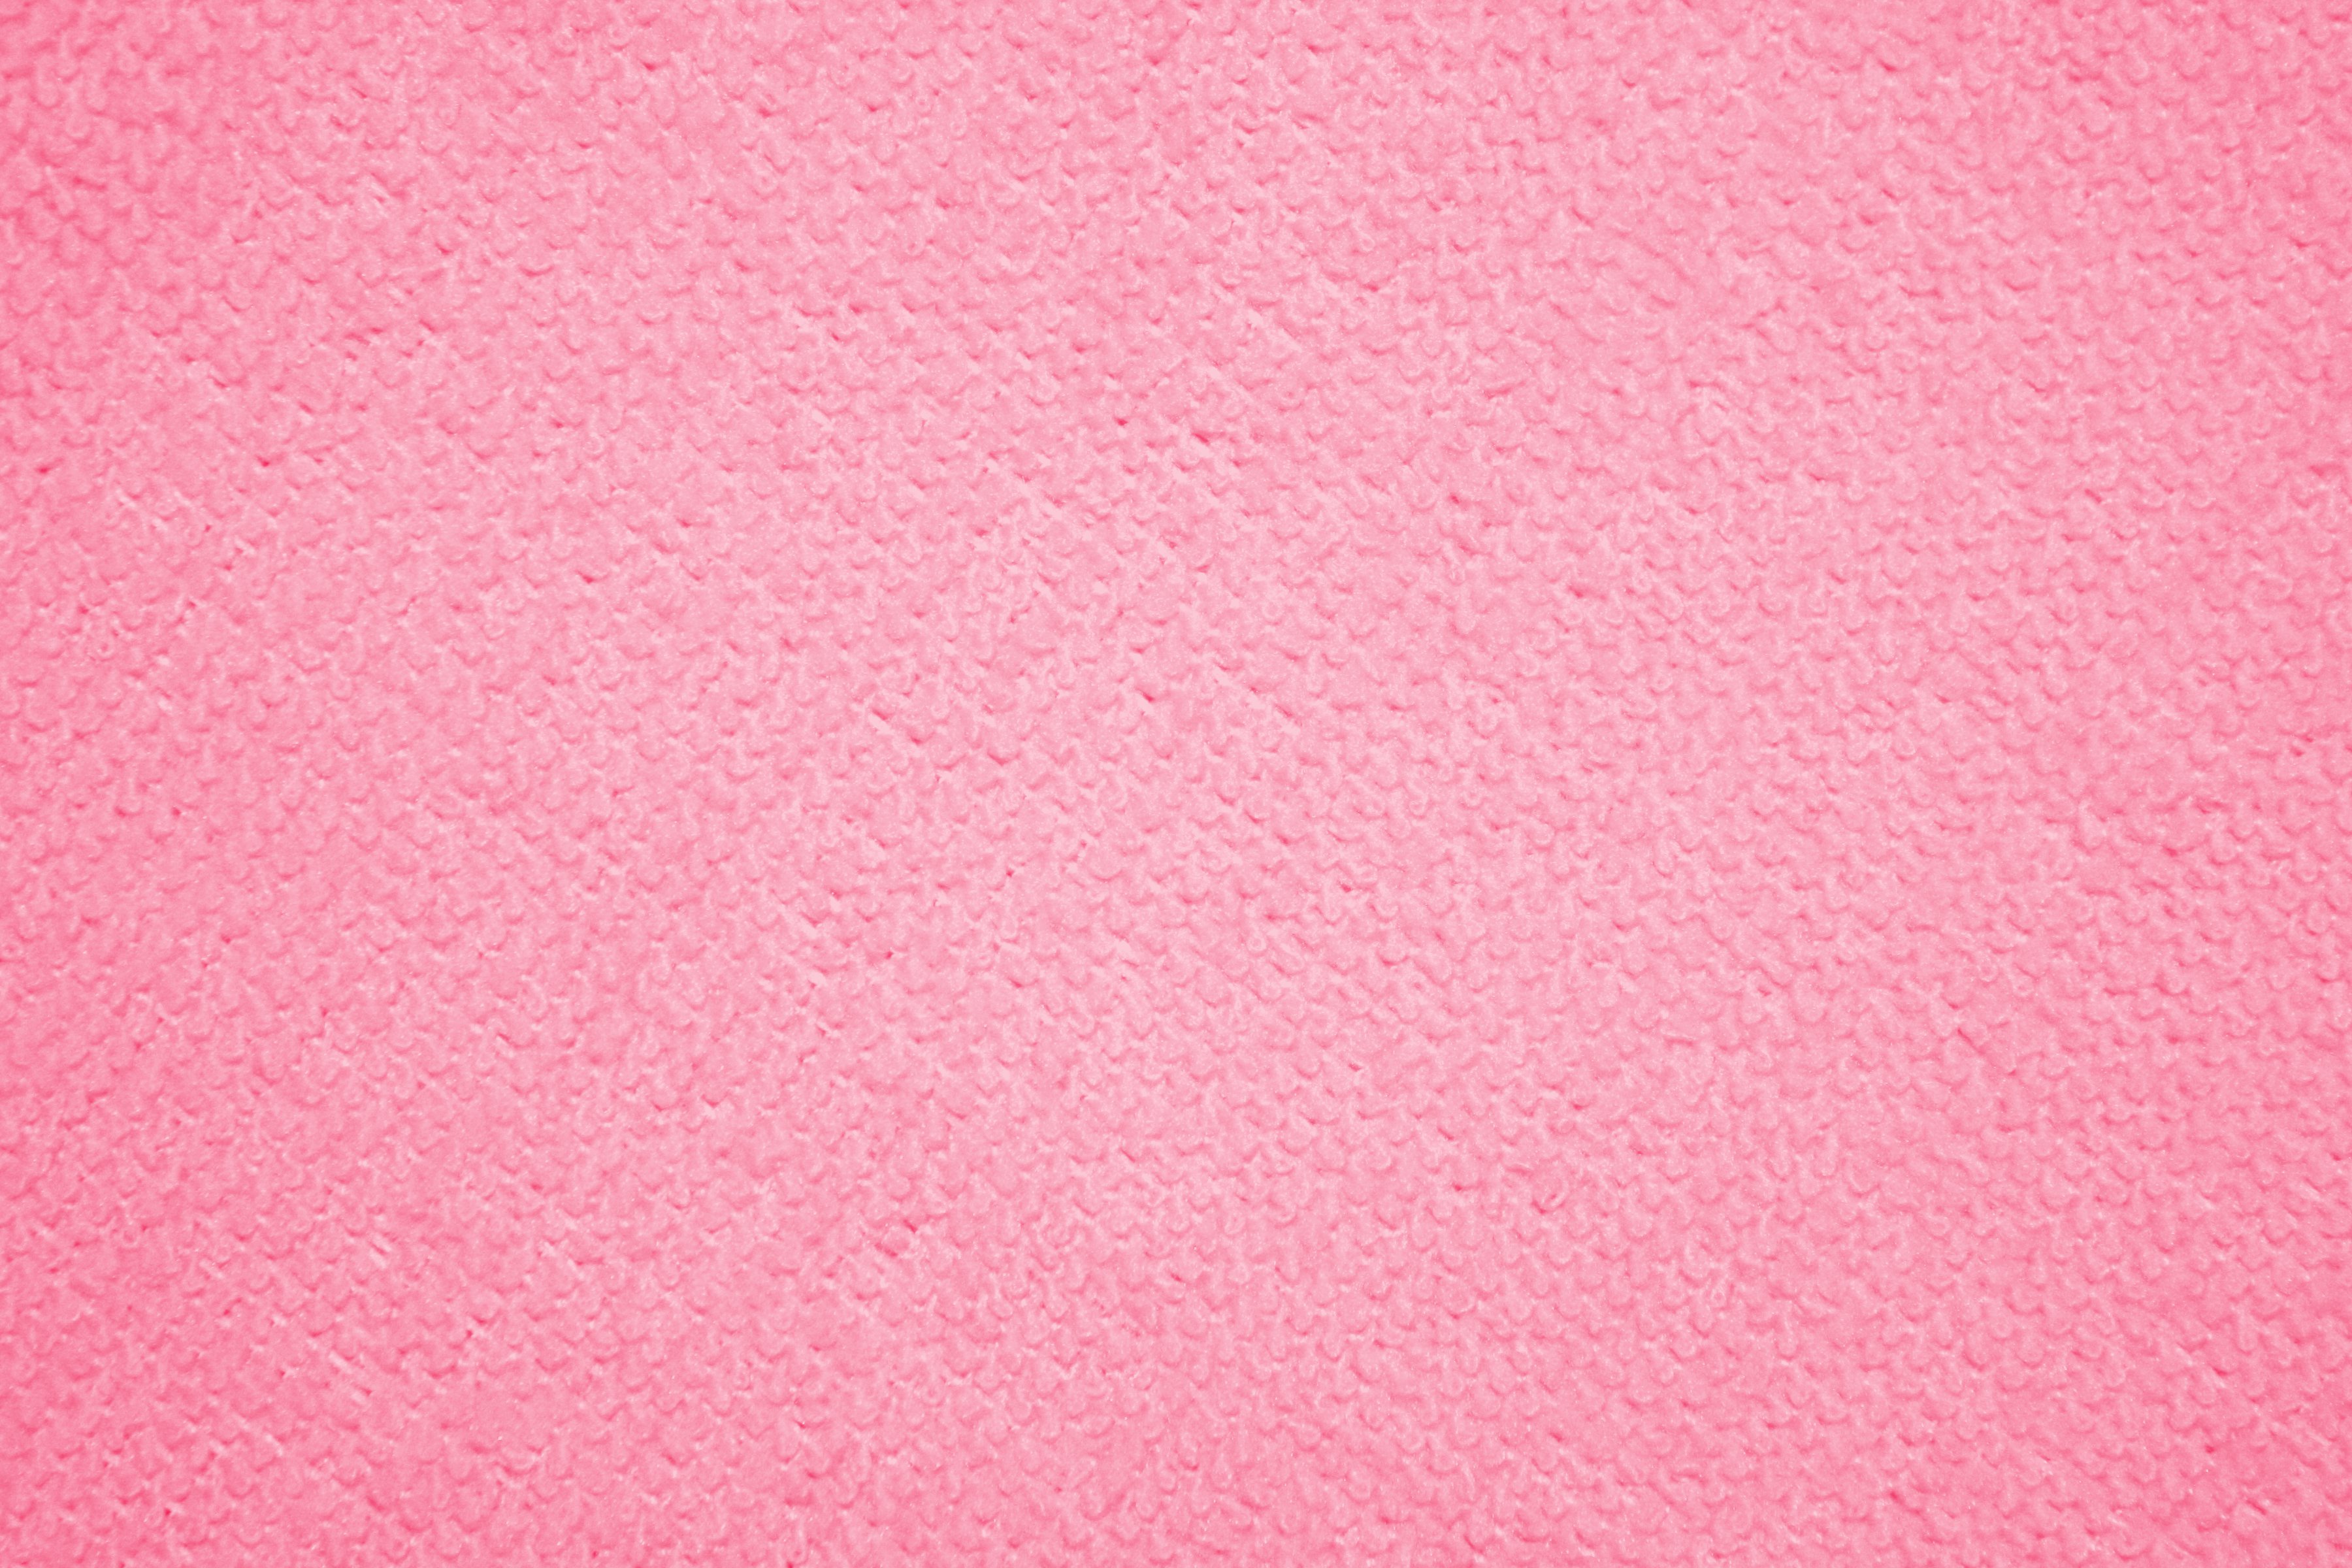 Salmon Pink Or Coral Colored Microfiber Cloth Fabric Texture Picture